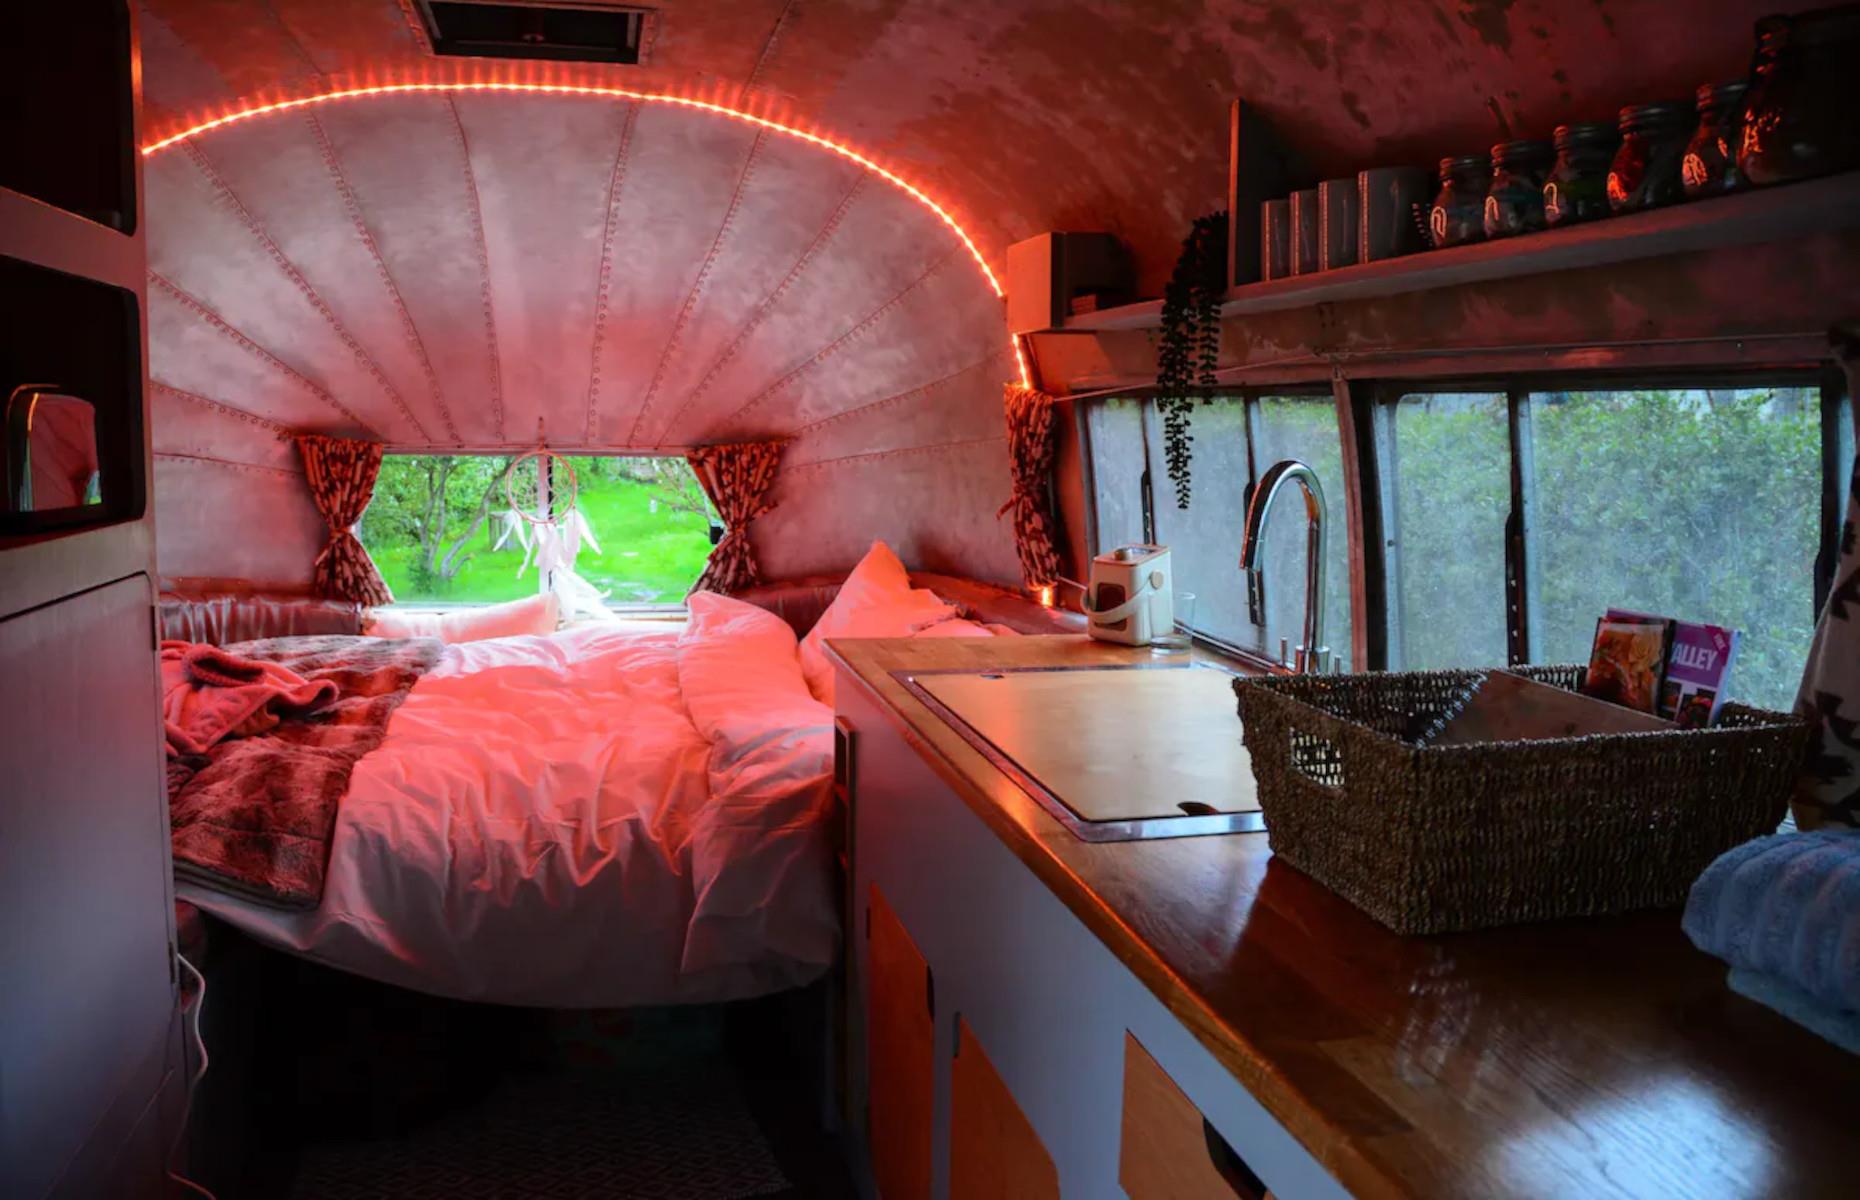 <p>For lovers of <a href="https://www.loveproperty.com/gallerylist/136446/24-cottagecore-decor-ideas-for-a-modern-take-on-country-style">cottagecore</a>, this vintage-inspired Airstream will be a dream come true.</p>  <p>Complete with a cosy sleeping nook, a fully equipped galley kitchen, a small dressing room and a comfortable seating area, what this caravan lacks in space it more than makes up for in charm. </p>